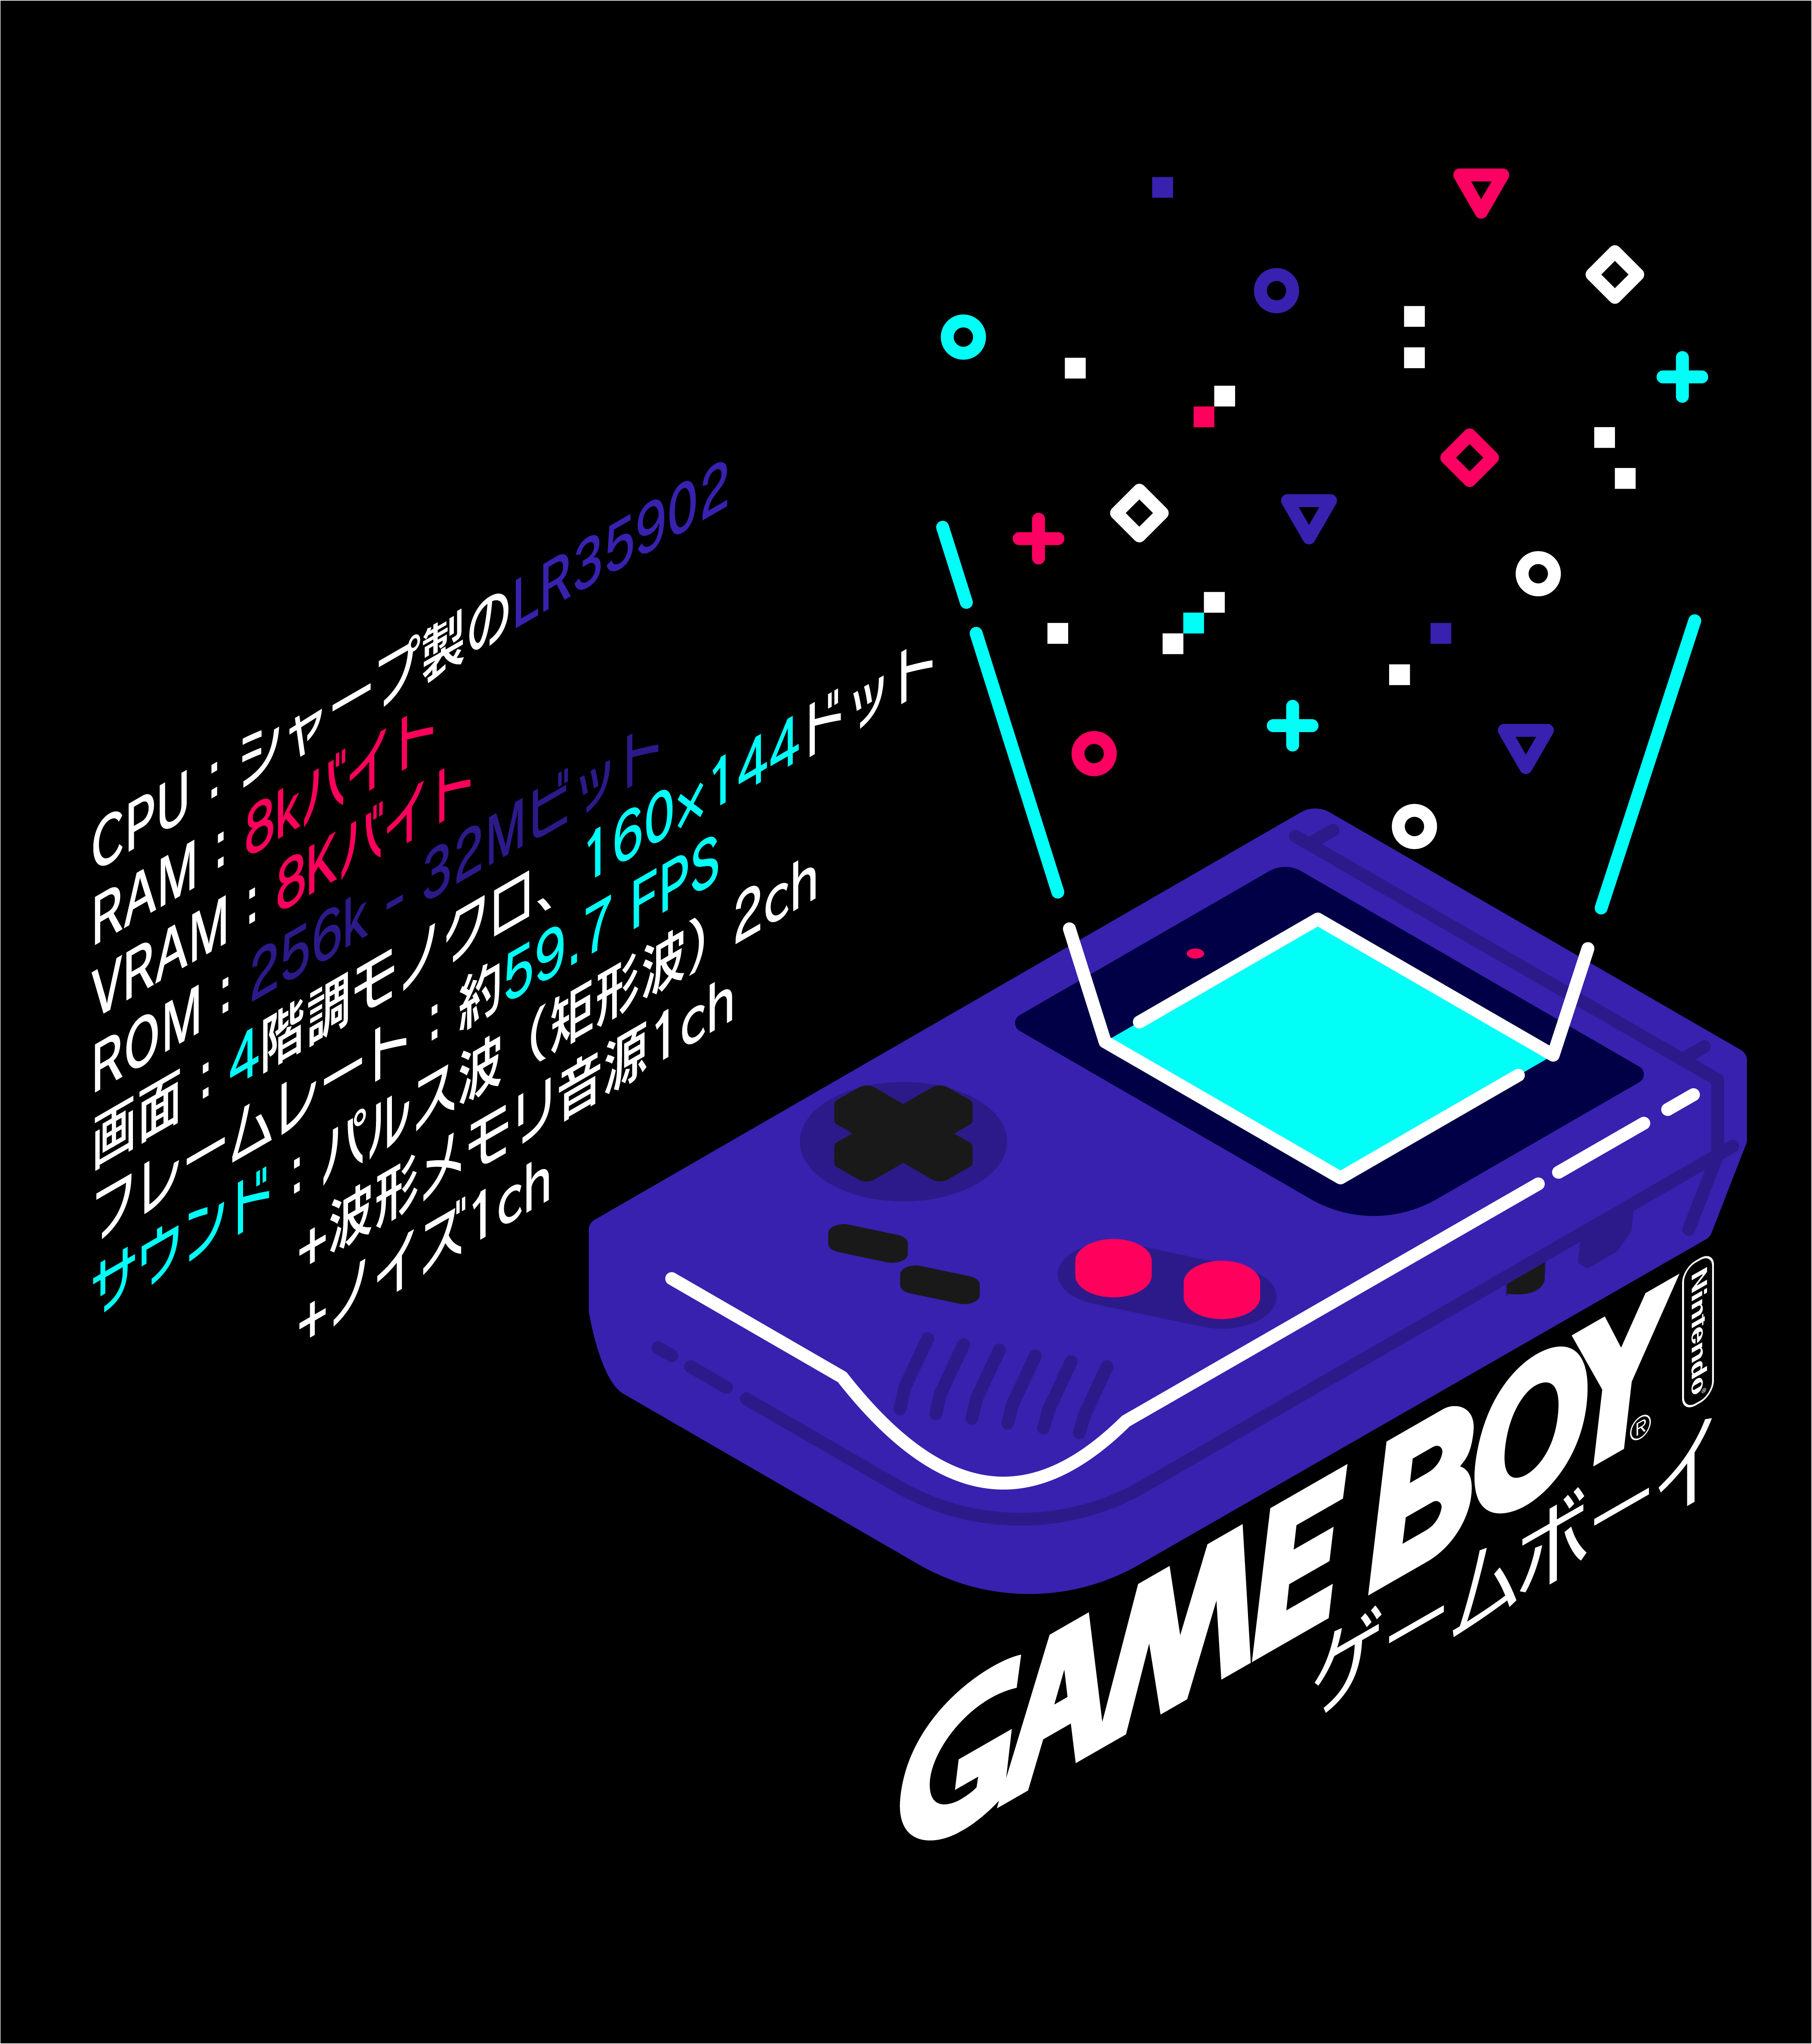 A Game Boy with its specifications listed on a black background - Game Boy